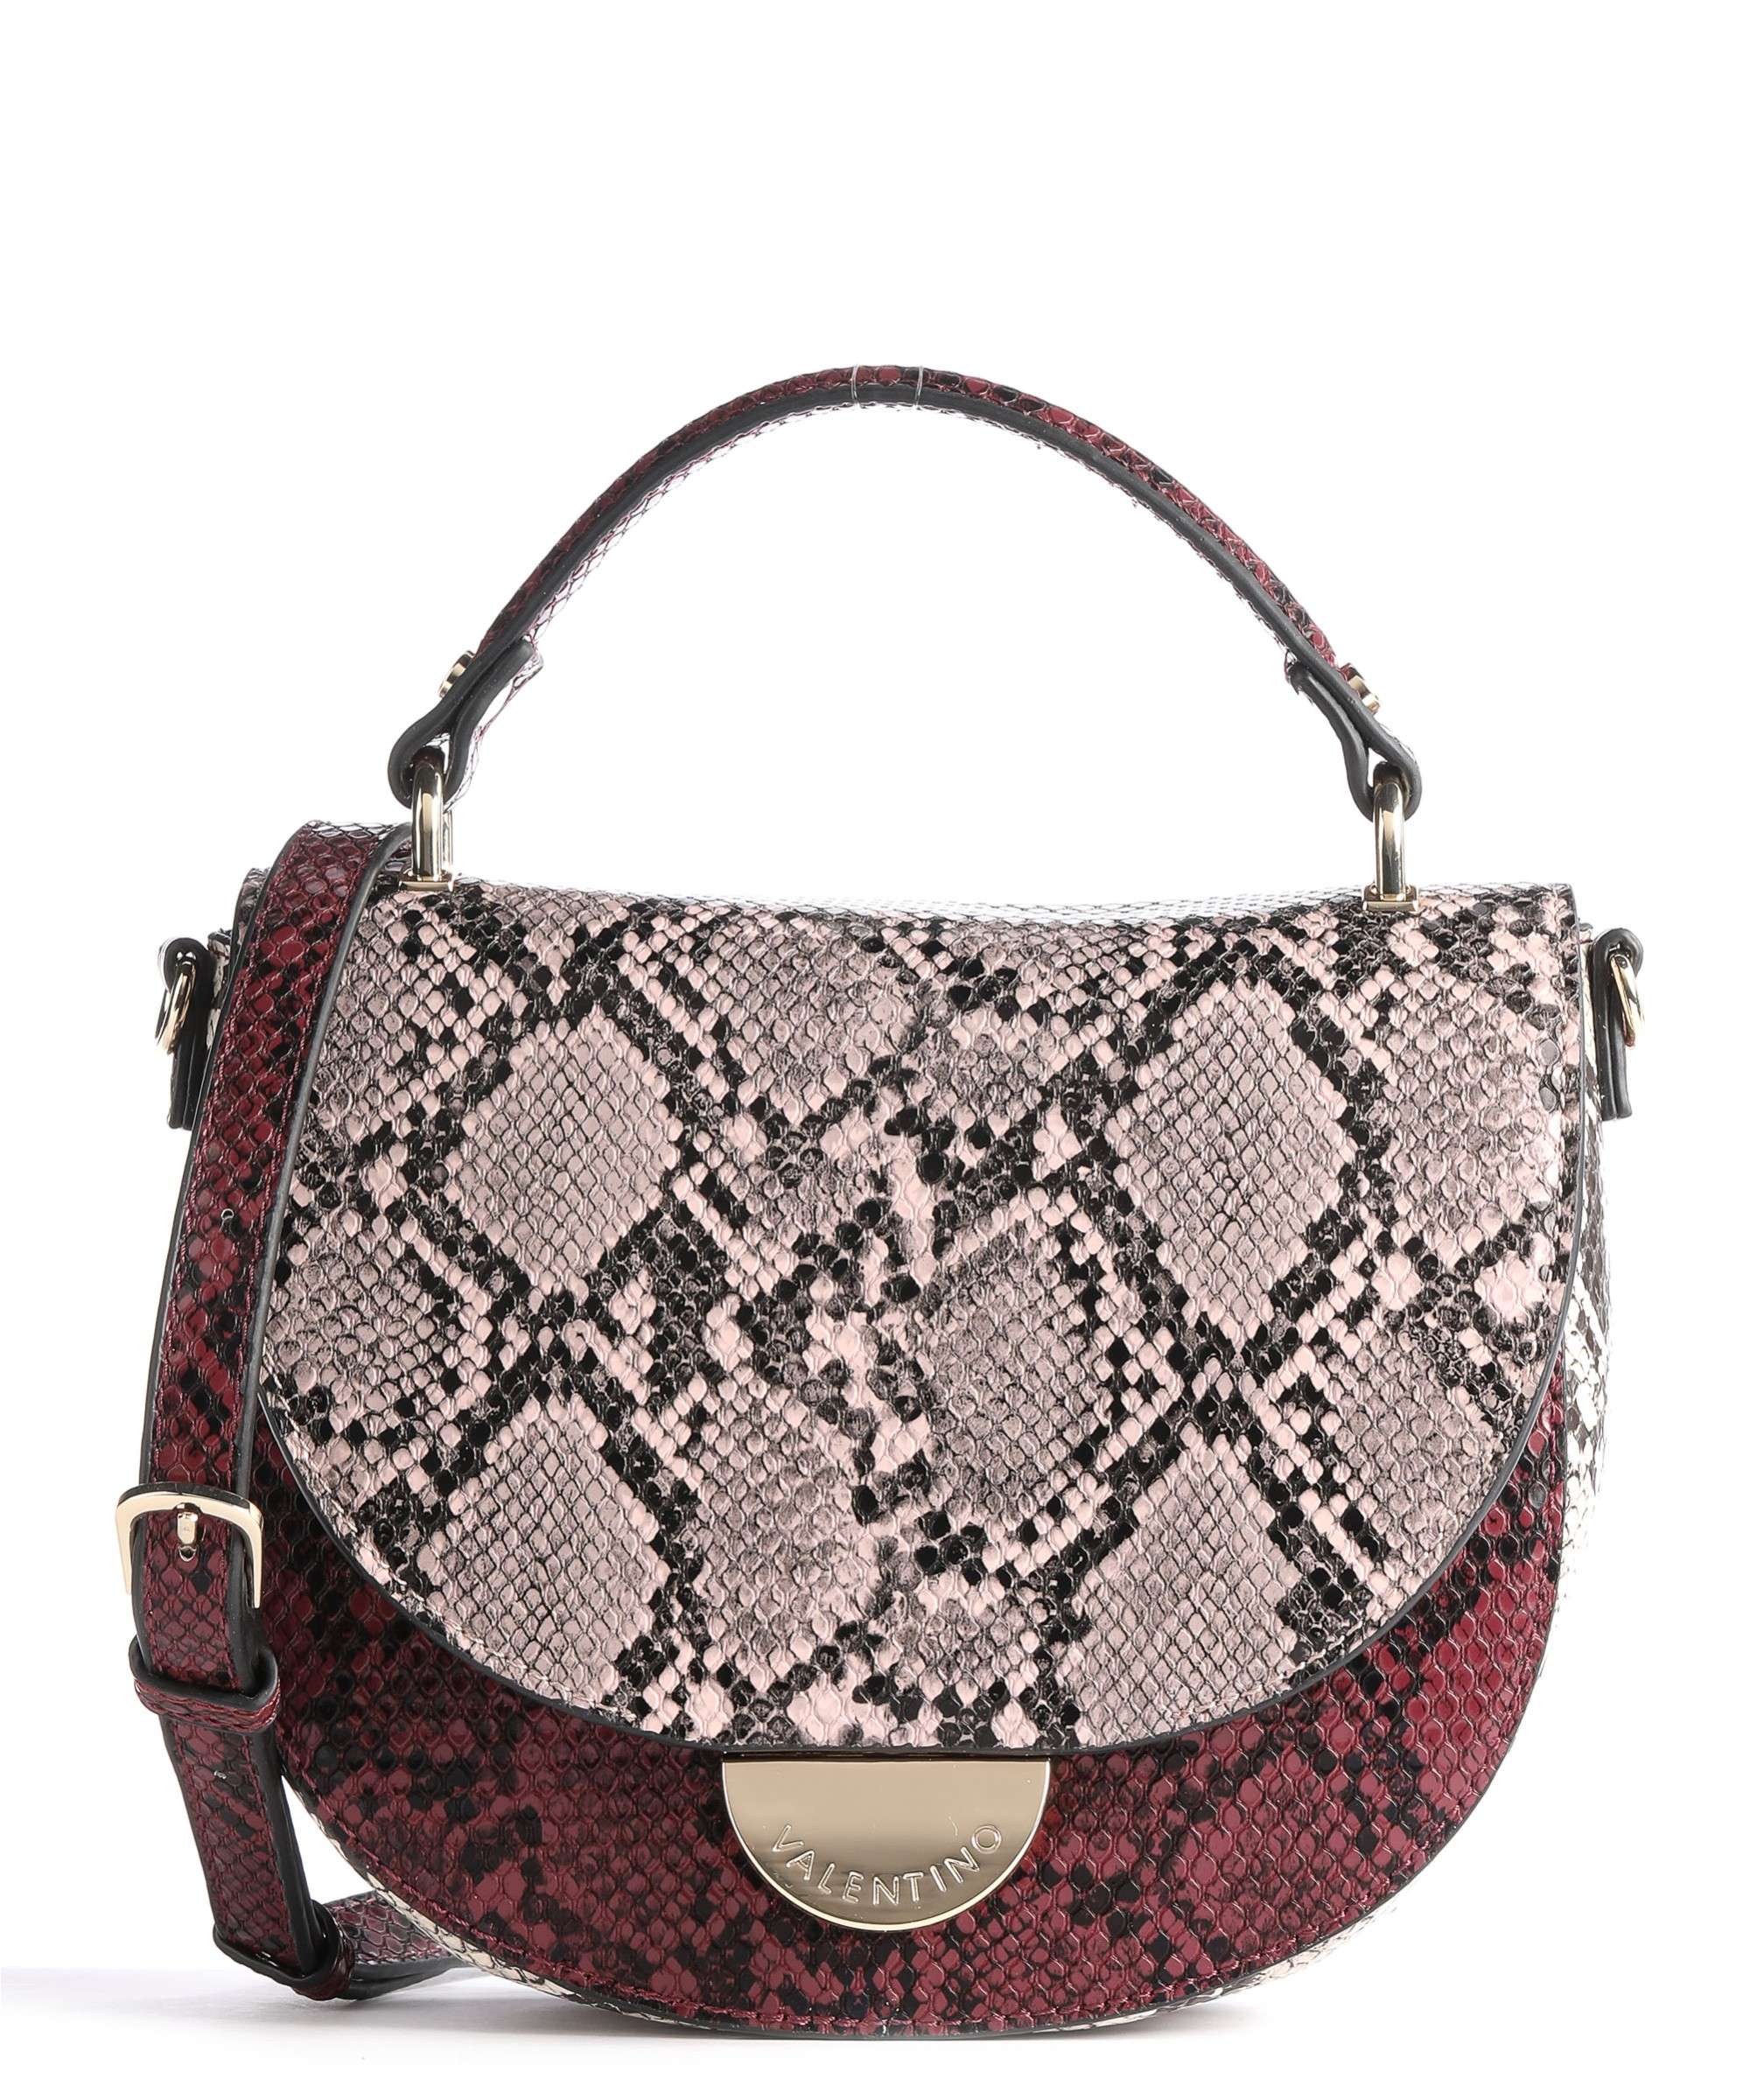 Copy of VALENTINO BAGS - Cedar Crossbody bag red snake skin synthetic leather | Bags Crossbody Bags | Valentino Bags | Fashion2B